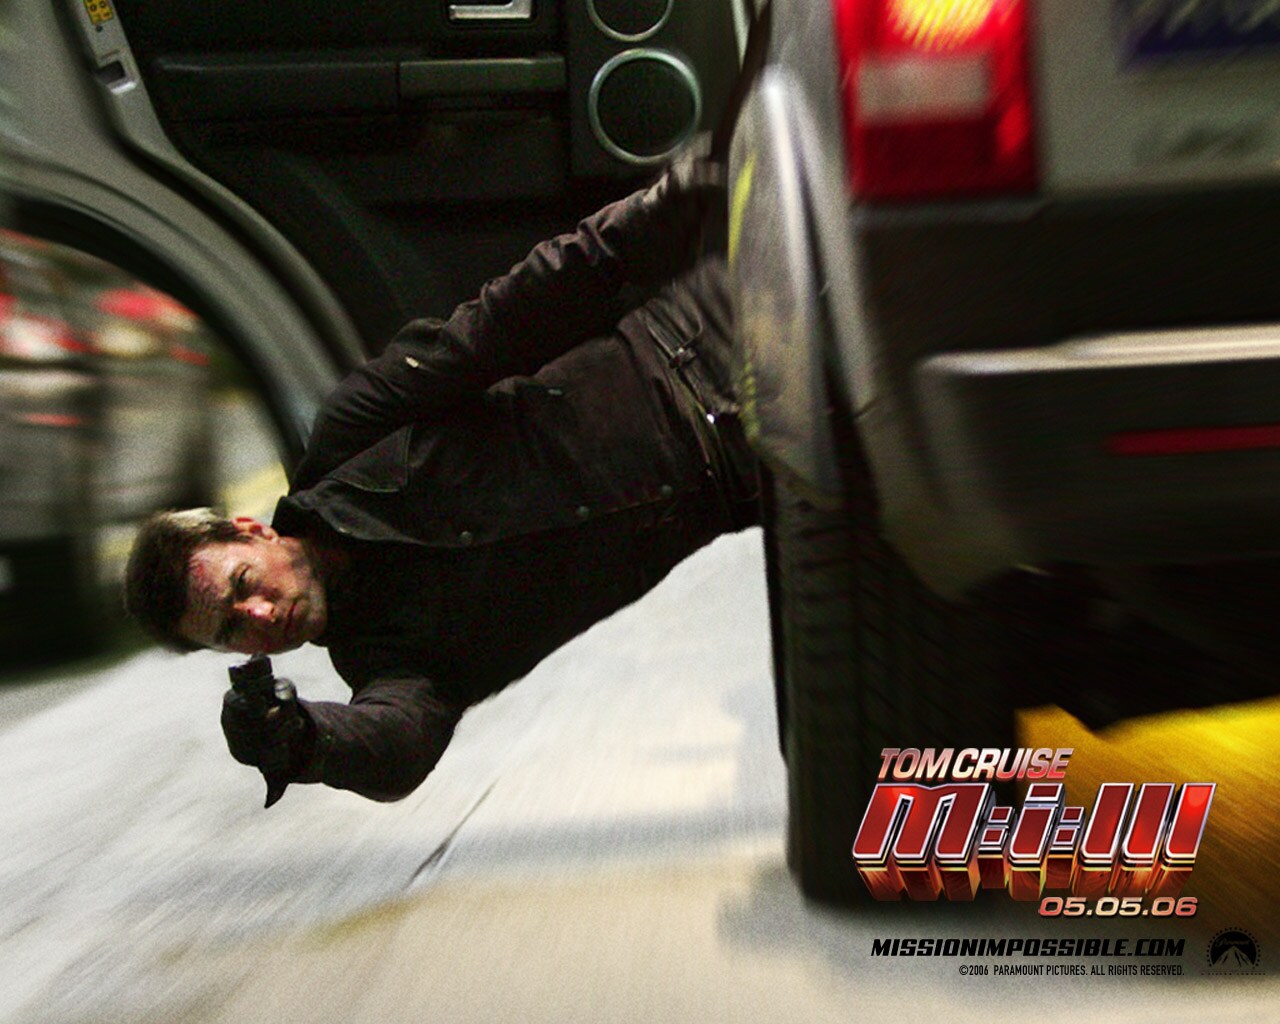 MISSION: IMPOSSIBLE 3 WALLPAPERS O_mi3_6_6